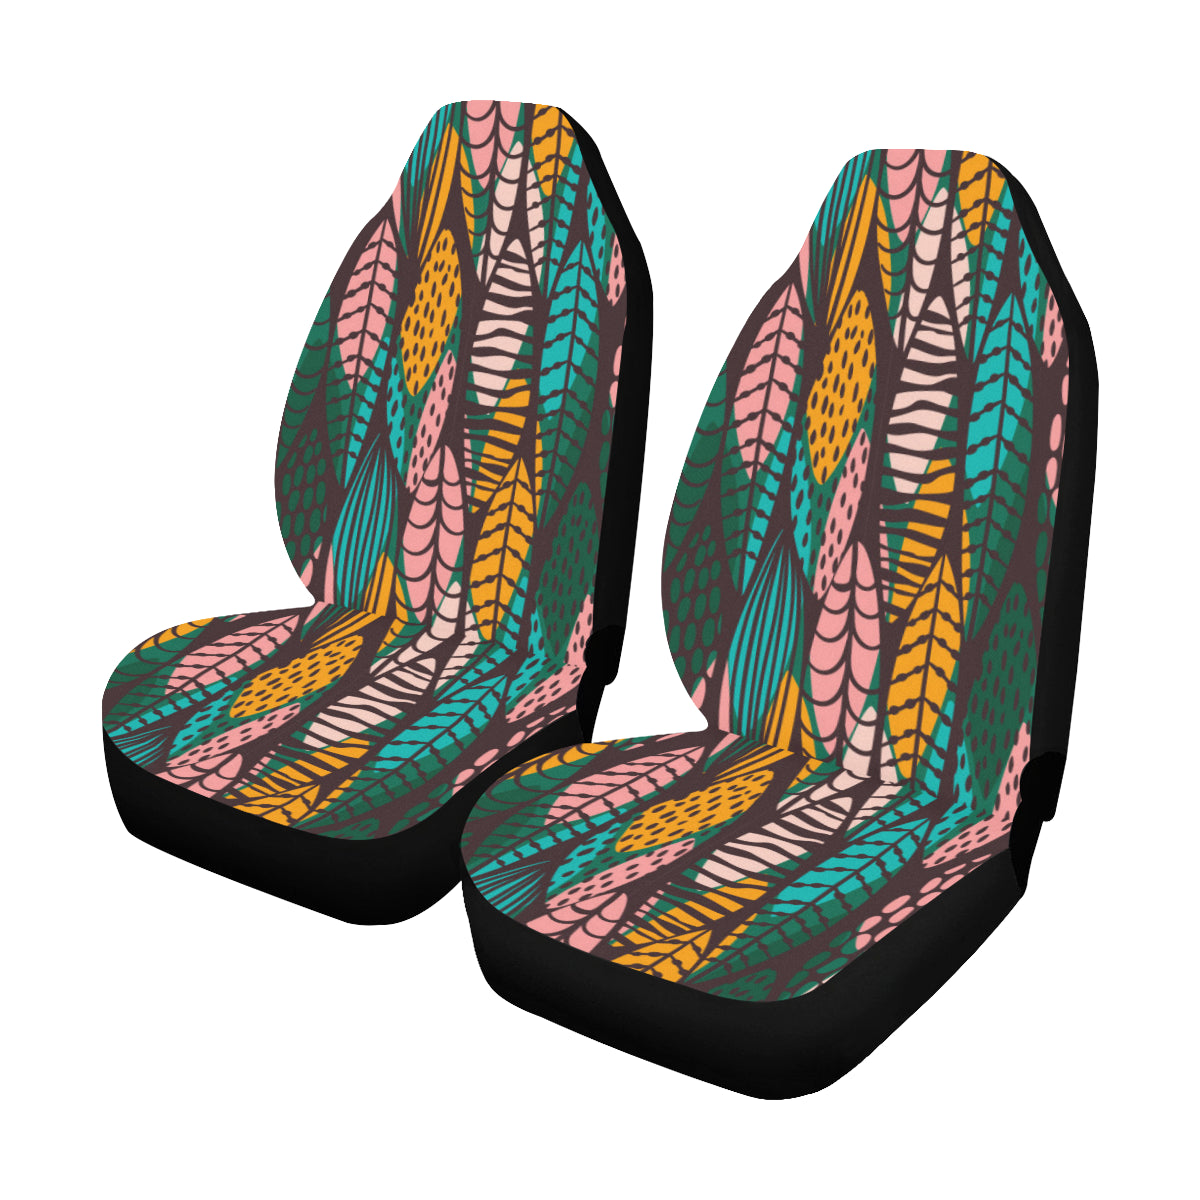 Surfing Boho Car Seat Covers 2 pc, Leaf Aztec Tribal Indian Pattern Bohemian Art Front Seat Covers, Car SUV Seat Protector Accessory Decor Starcove Fashion